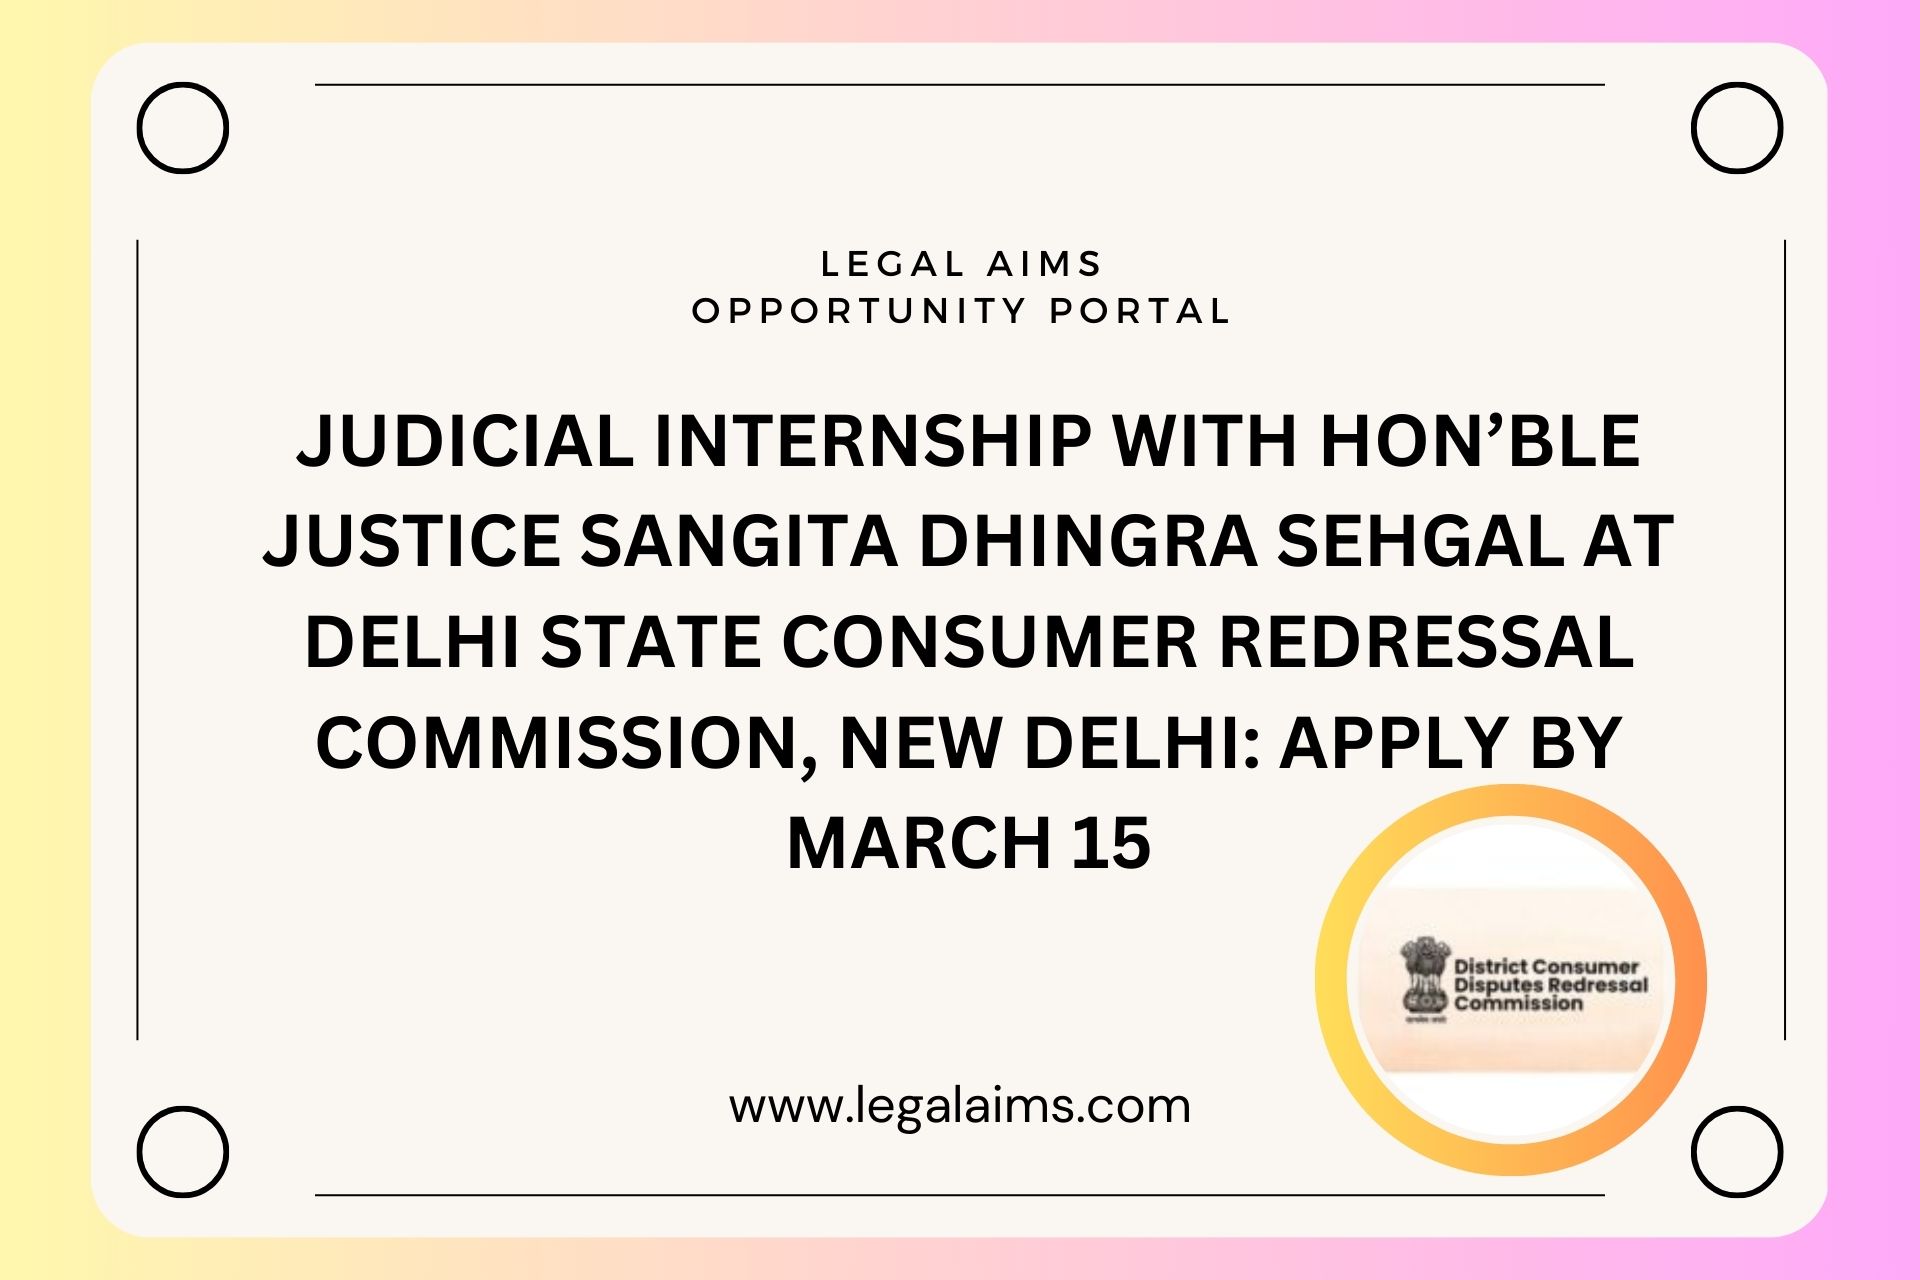 Judicial Internship with Hon’ble Justice Sangita Dhingra Sehgal at Delhi State Consumer Redressal Commission, New Delhi: Apply by March 15